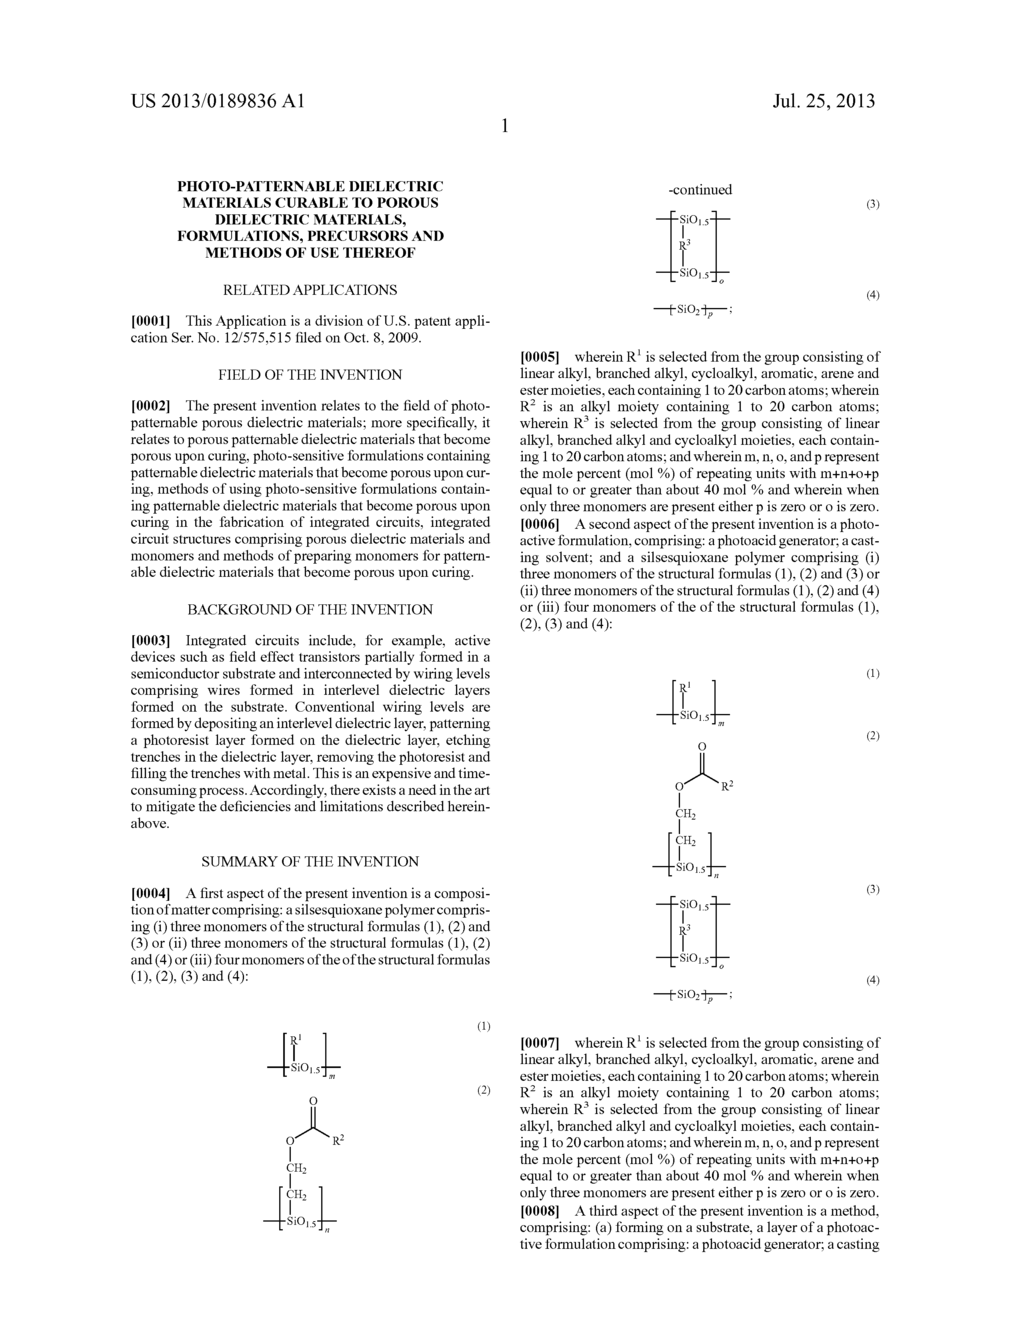 PHOTO-PATTERNABLE DIELECTRIC MATERIALS CURABLE TO POROUS DIELECTRIC     MATERIALS, FORMULATIONS, PRECURSORS AND METHODS OF USE THEREOF - diagram, schematic, and image 07